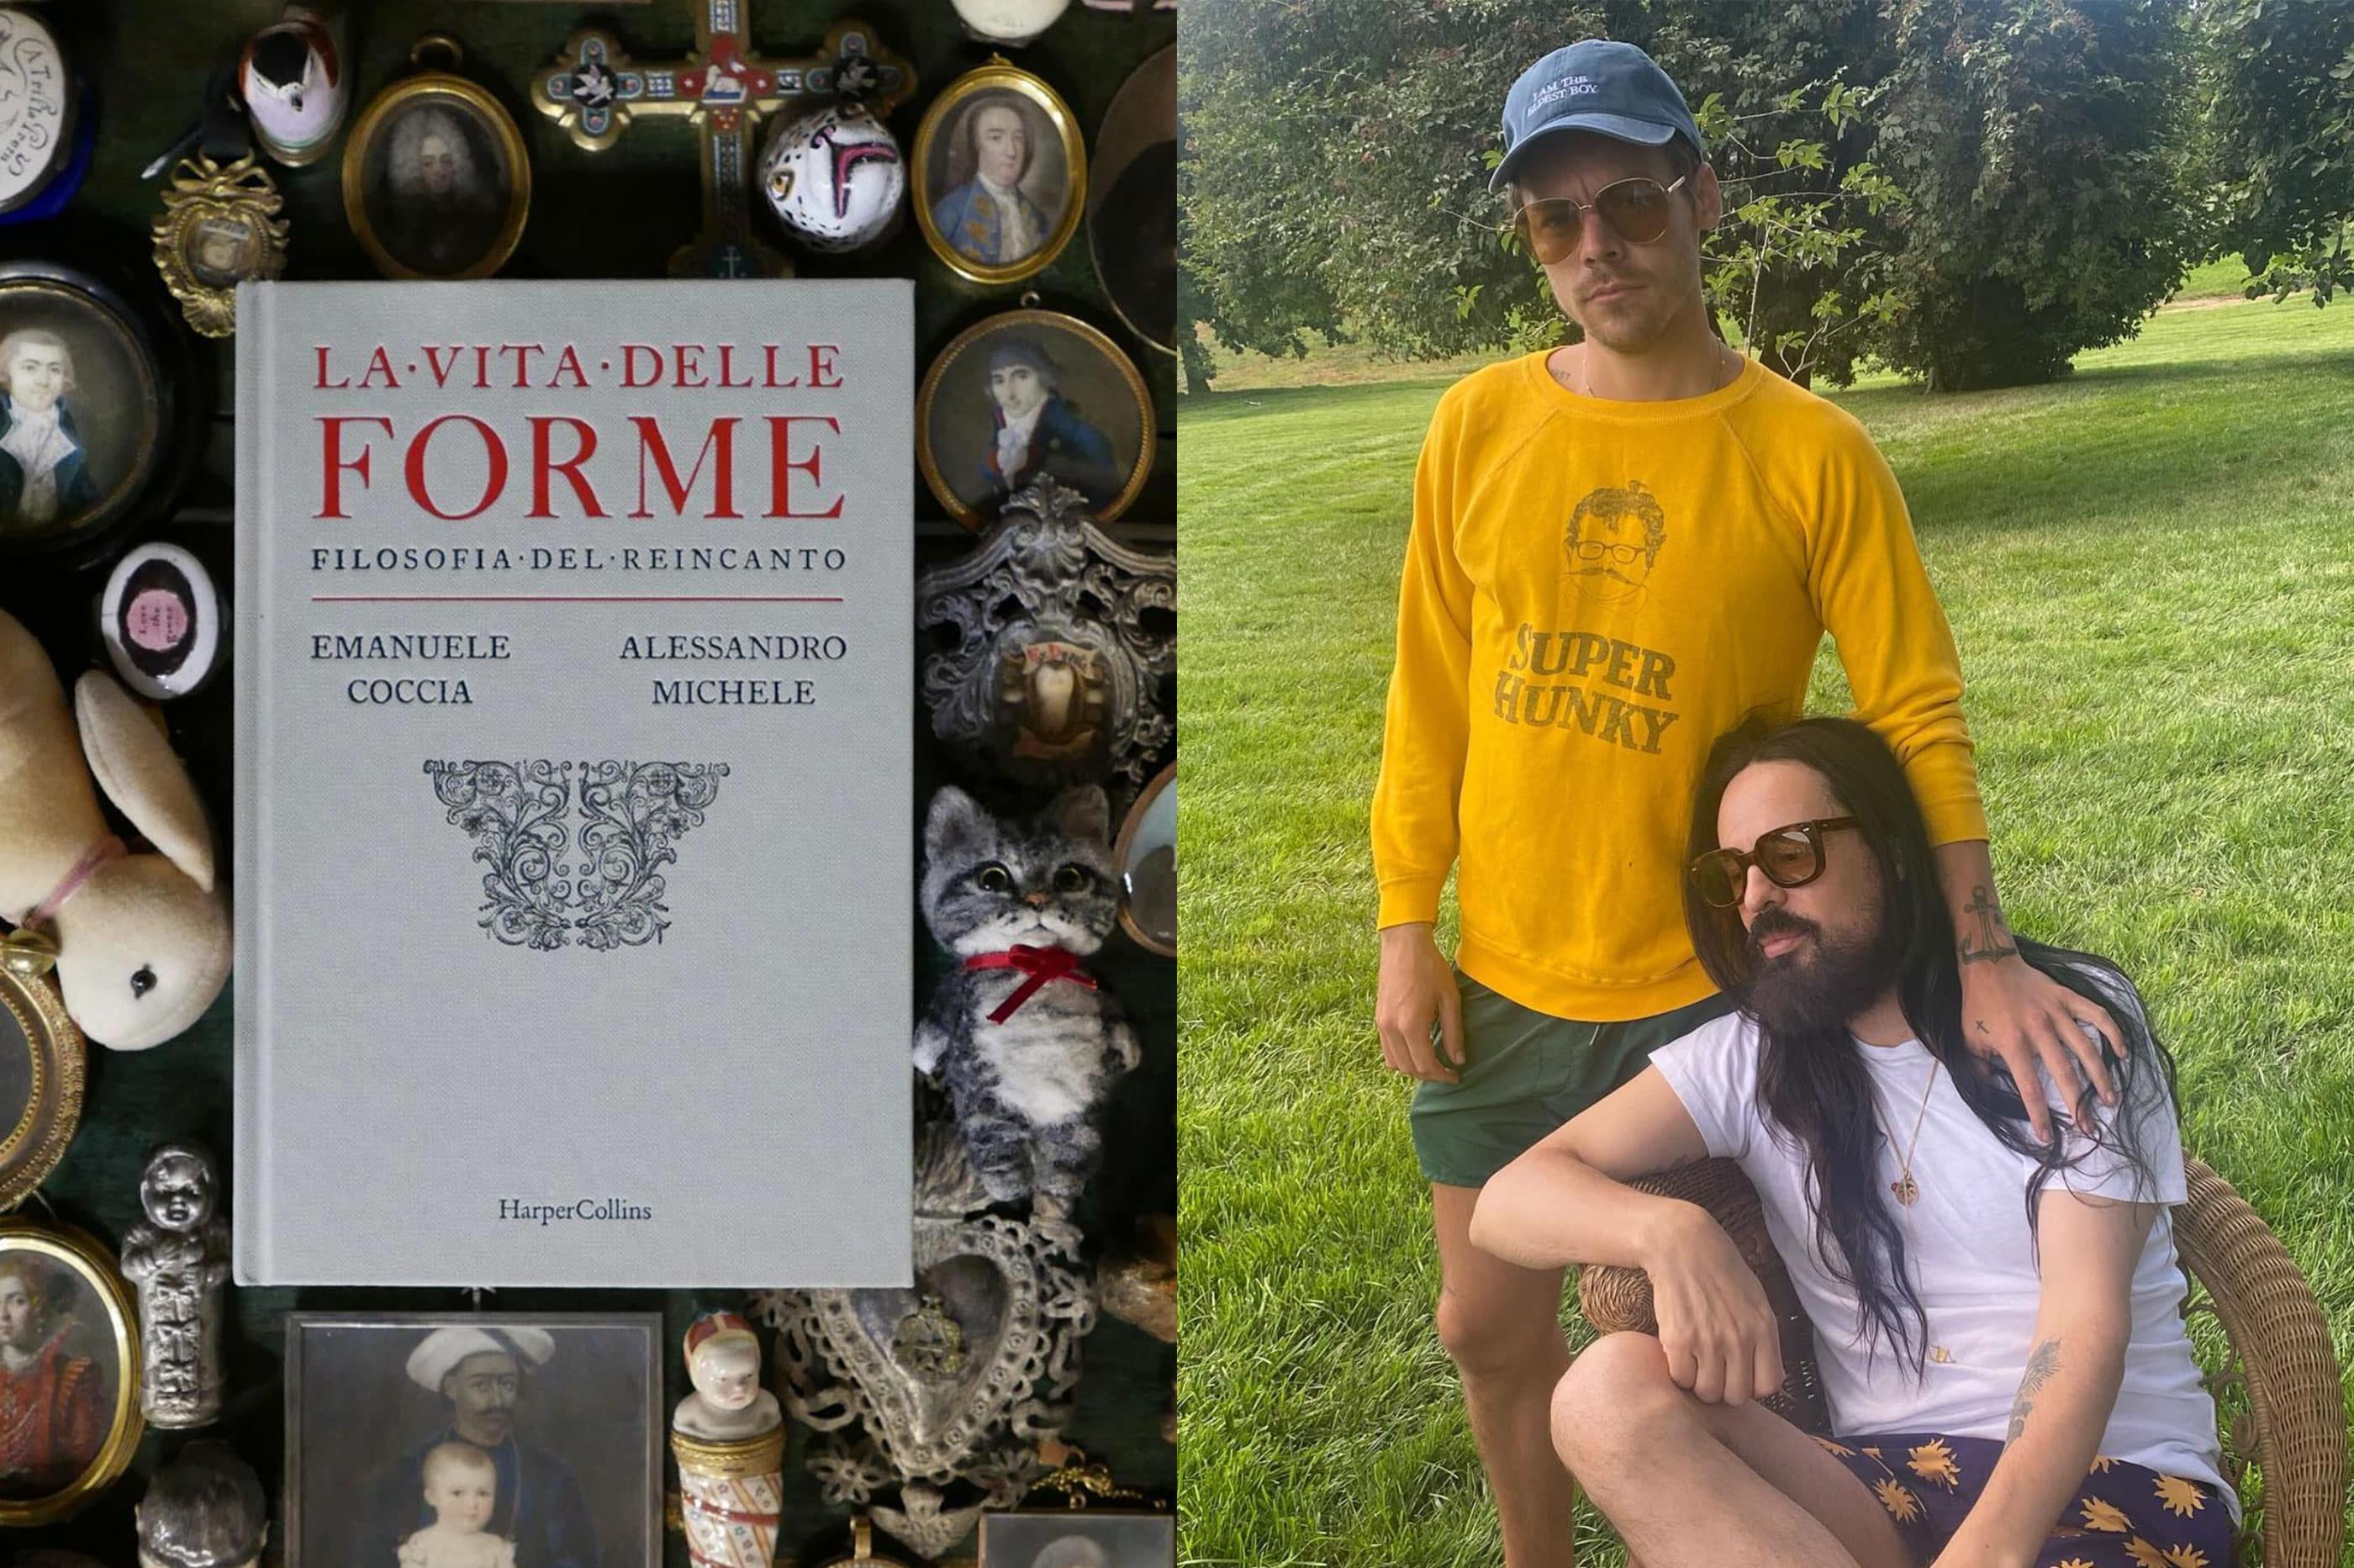 Alessandro Michele just wrote his first book